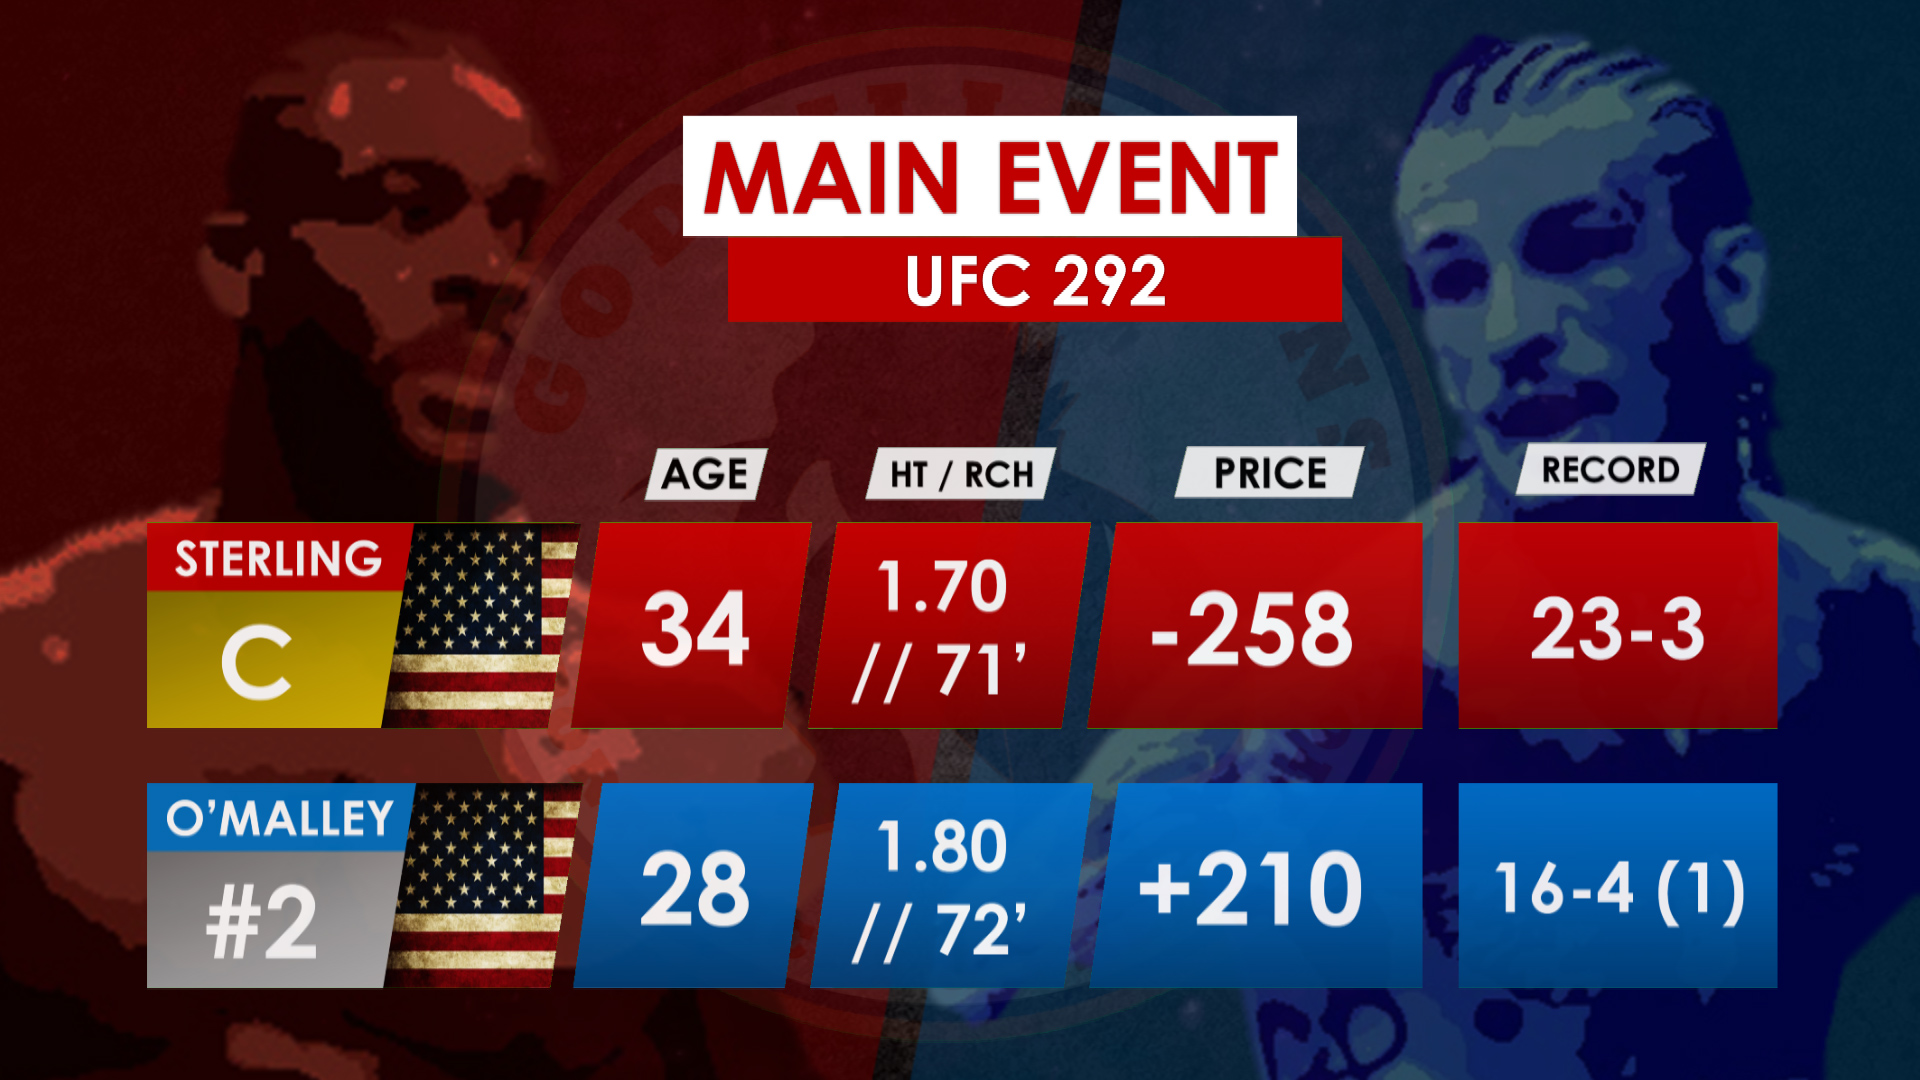 UFC 292 Main Event: Sterling vs O’Malley tale of the tape